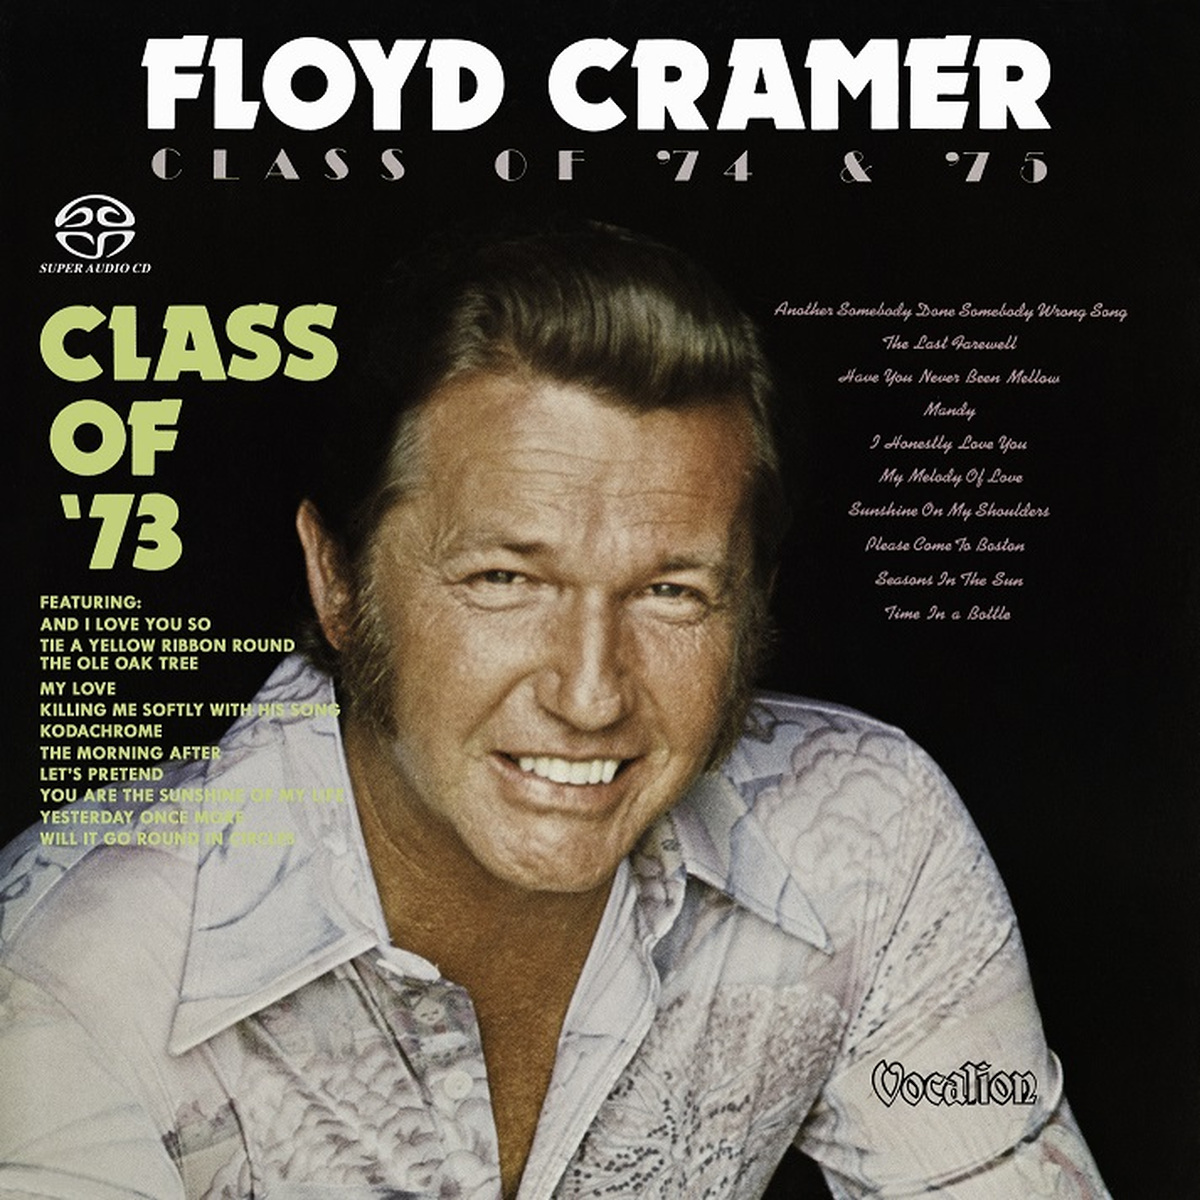 Floyd Cramer – Class Of ’73 & Class Of ’74-’75 (1973/1975) [Reissue 2016] MCH SACD ISO + Hi-Res FLAC